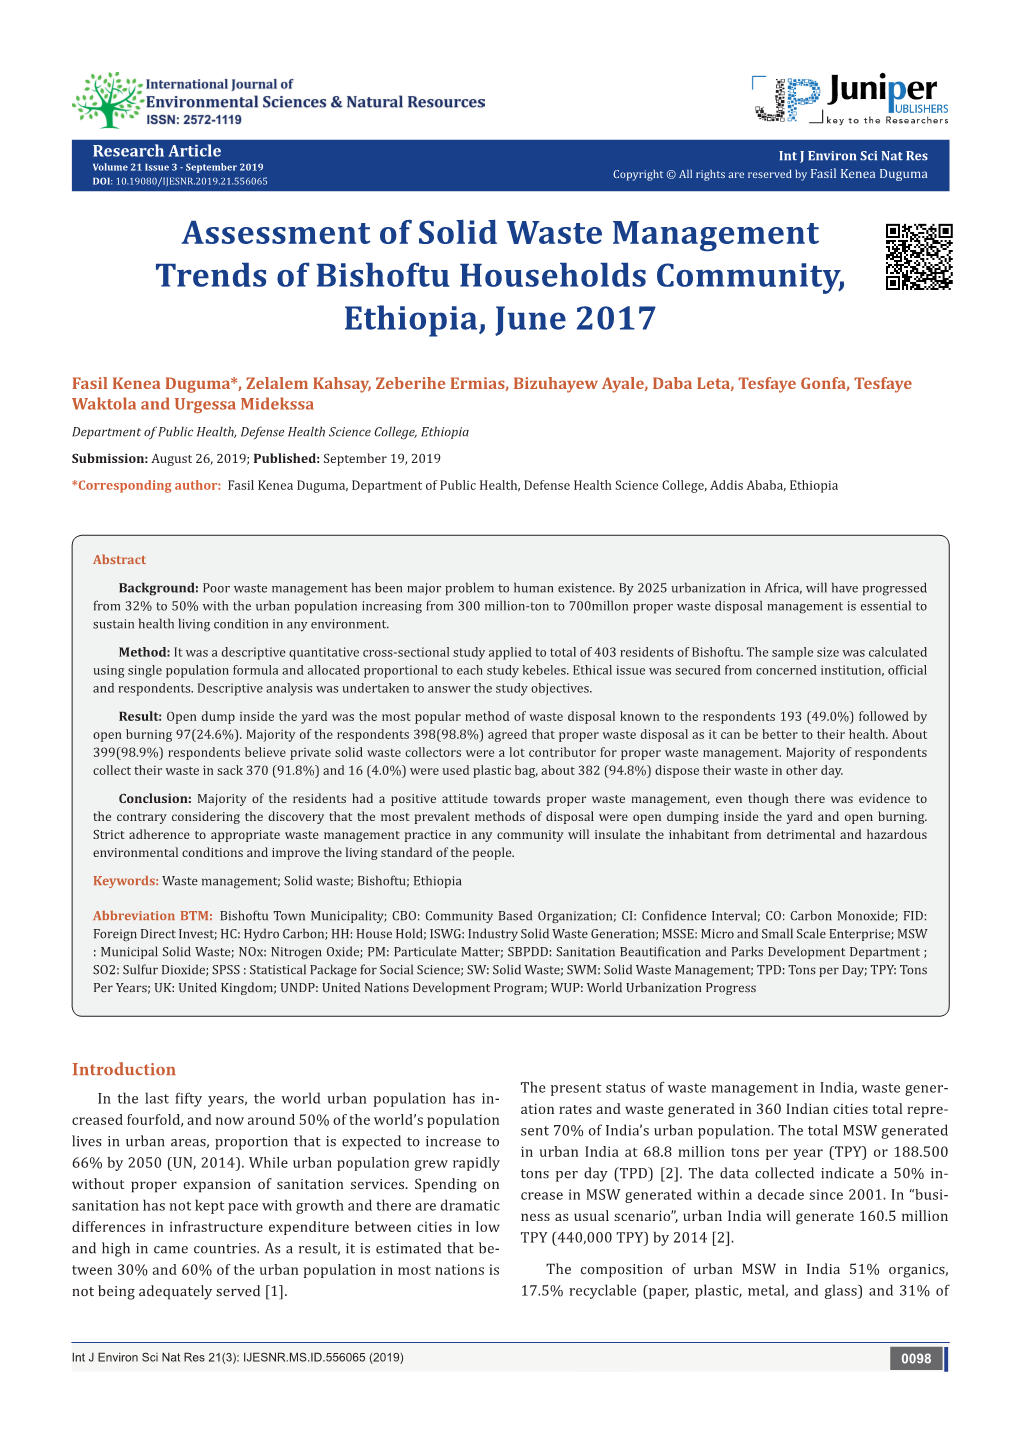 Assessment of Solid Waste Management Trends of Bishoftu Households Community, Ethiopia, June 2017